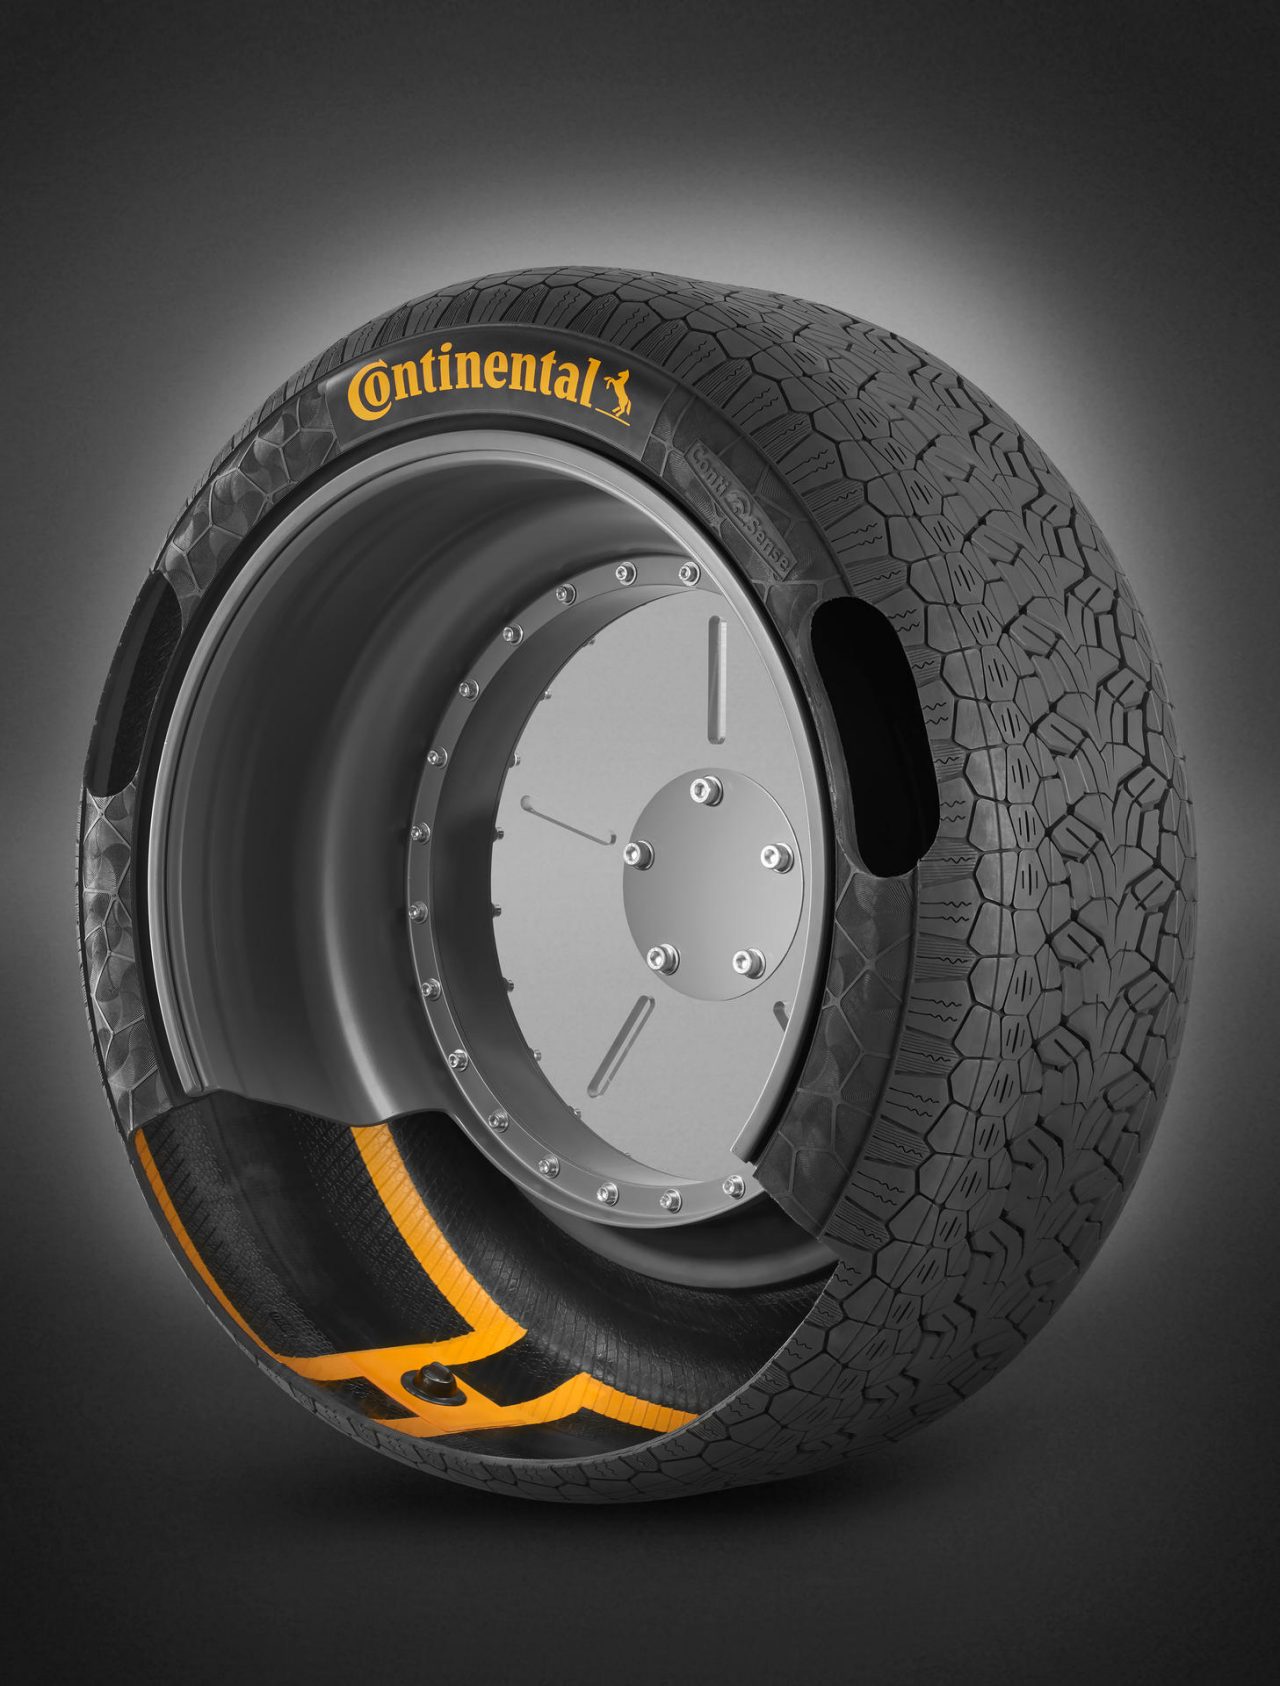 A tire with ContiSense technology